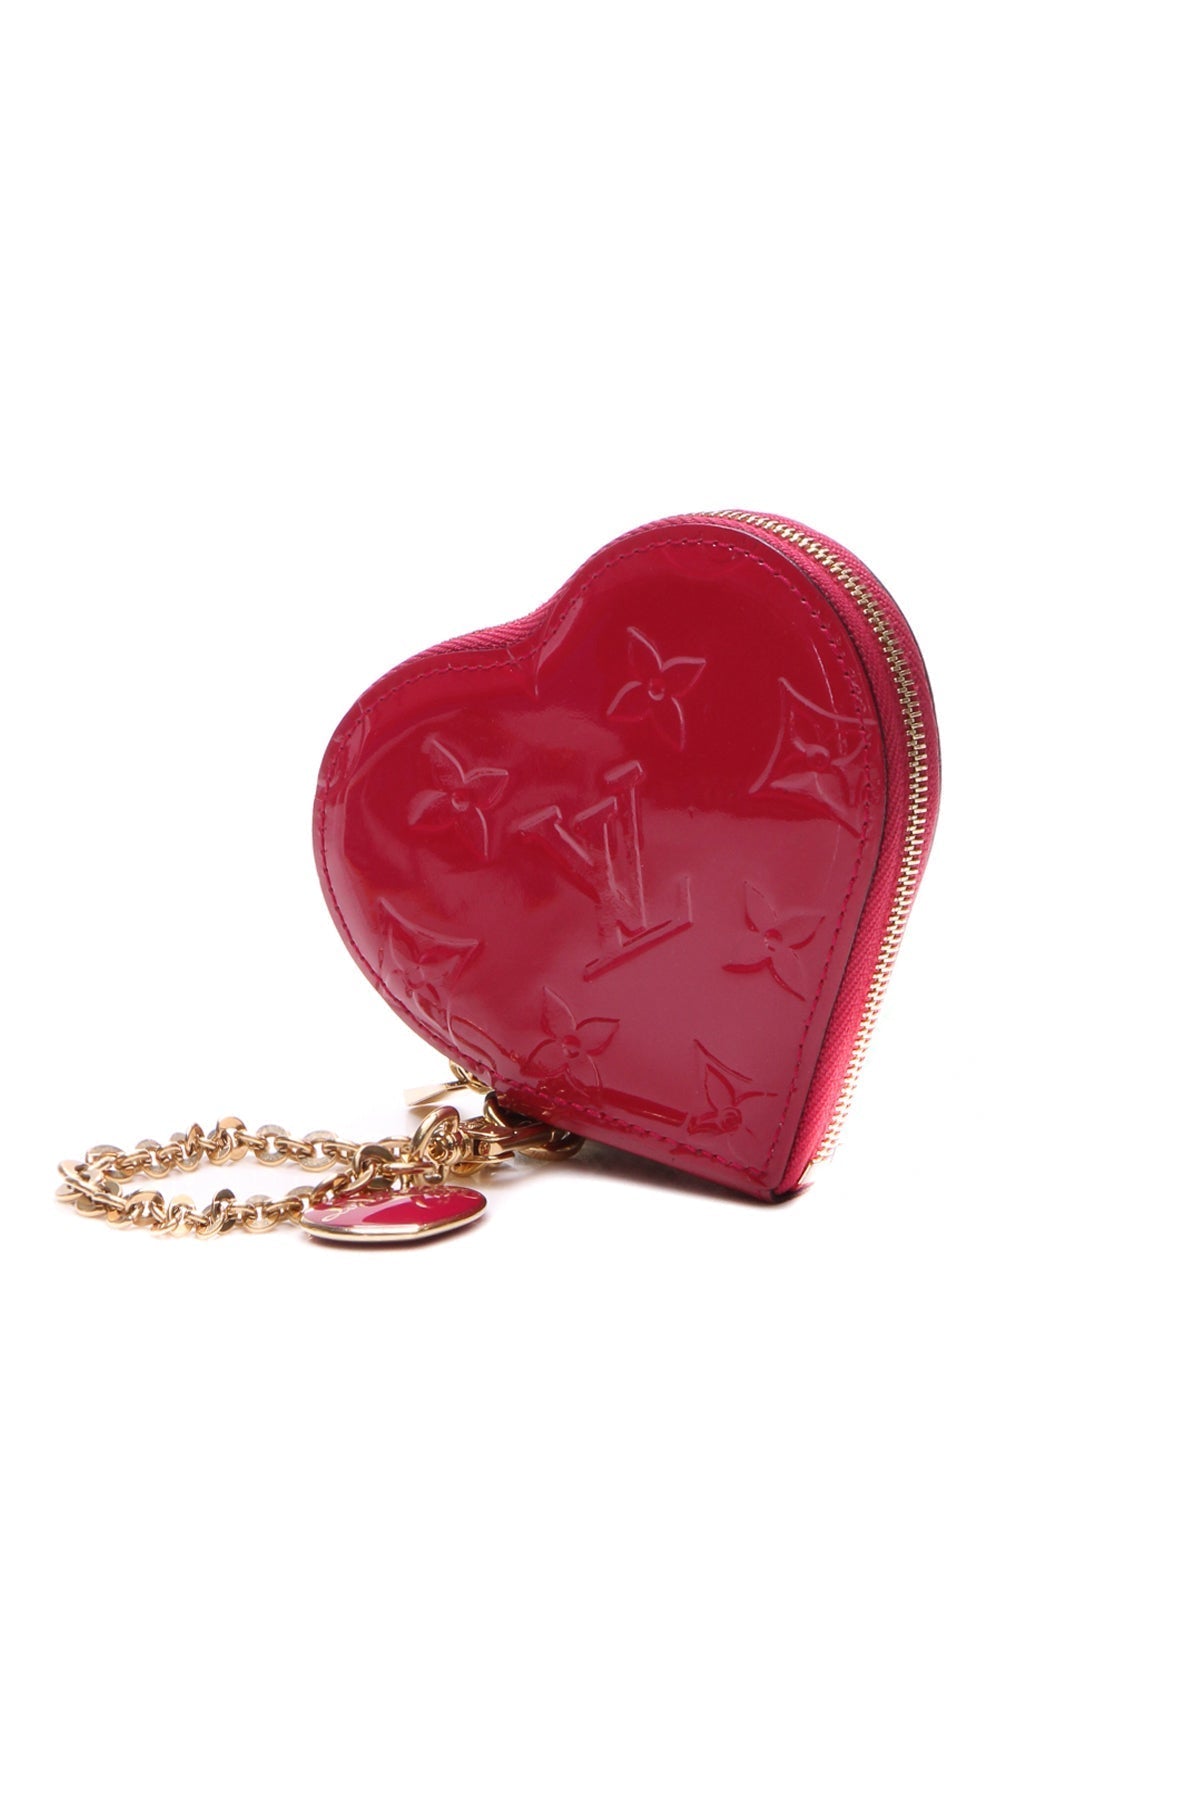 Vernis Heart Coin Purse - Rose Indian